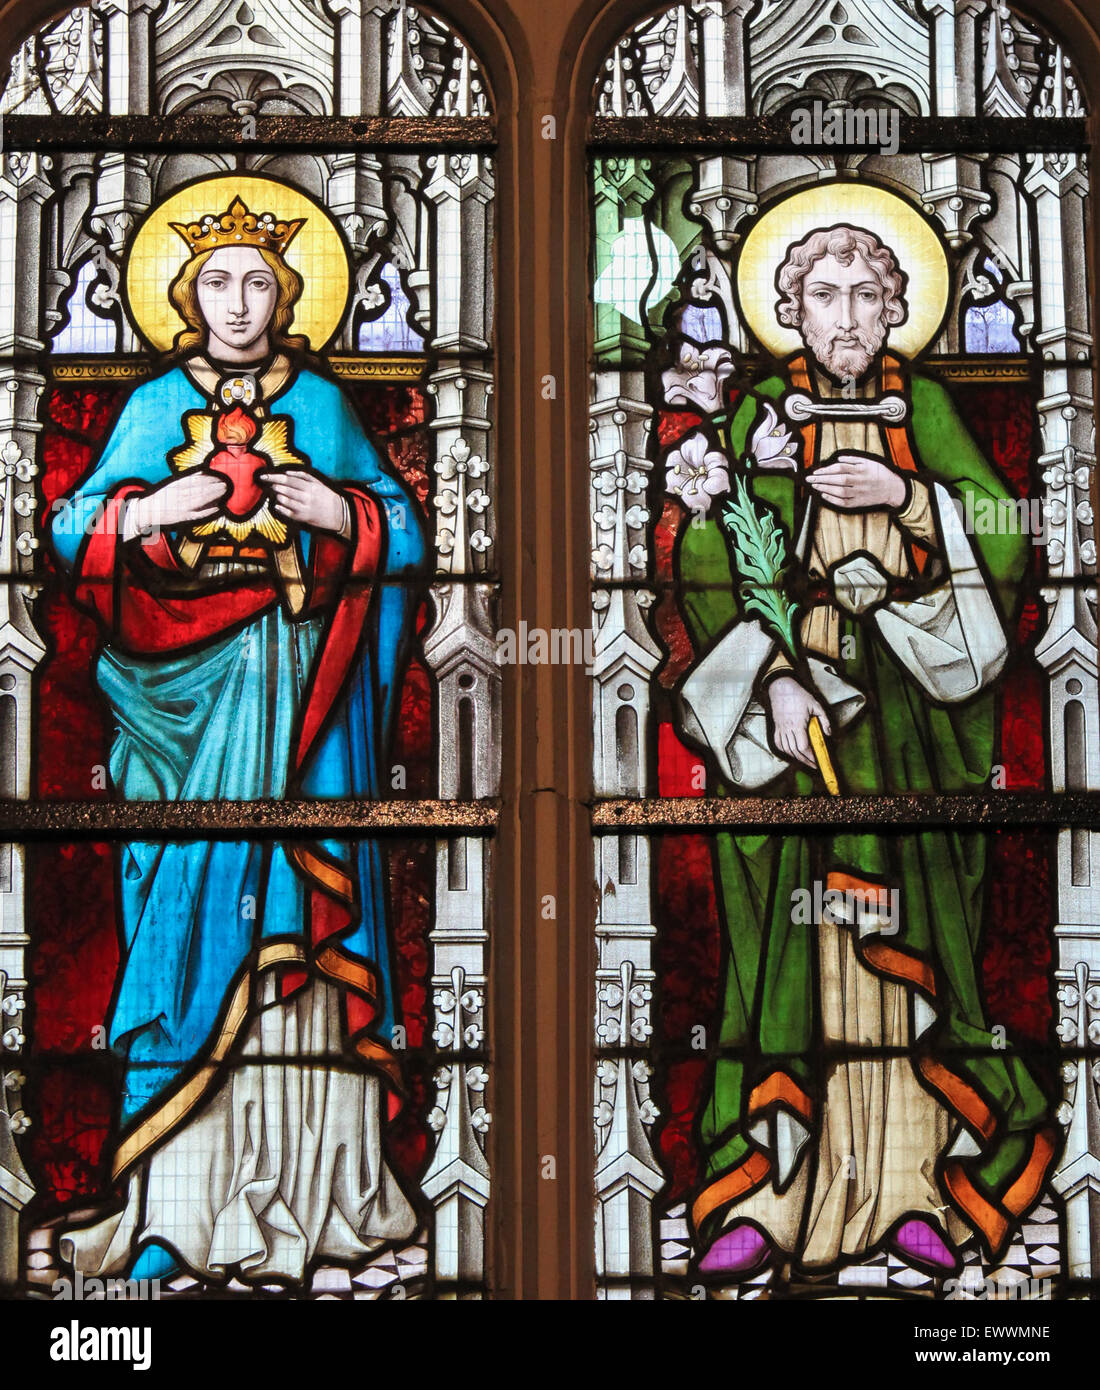 Stained glass window depicting Mother Mary and Saint Joseph, parents of Jesus Christ, in the Church of Stabroek, Belgium. Stock Photo